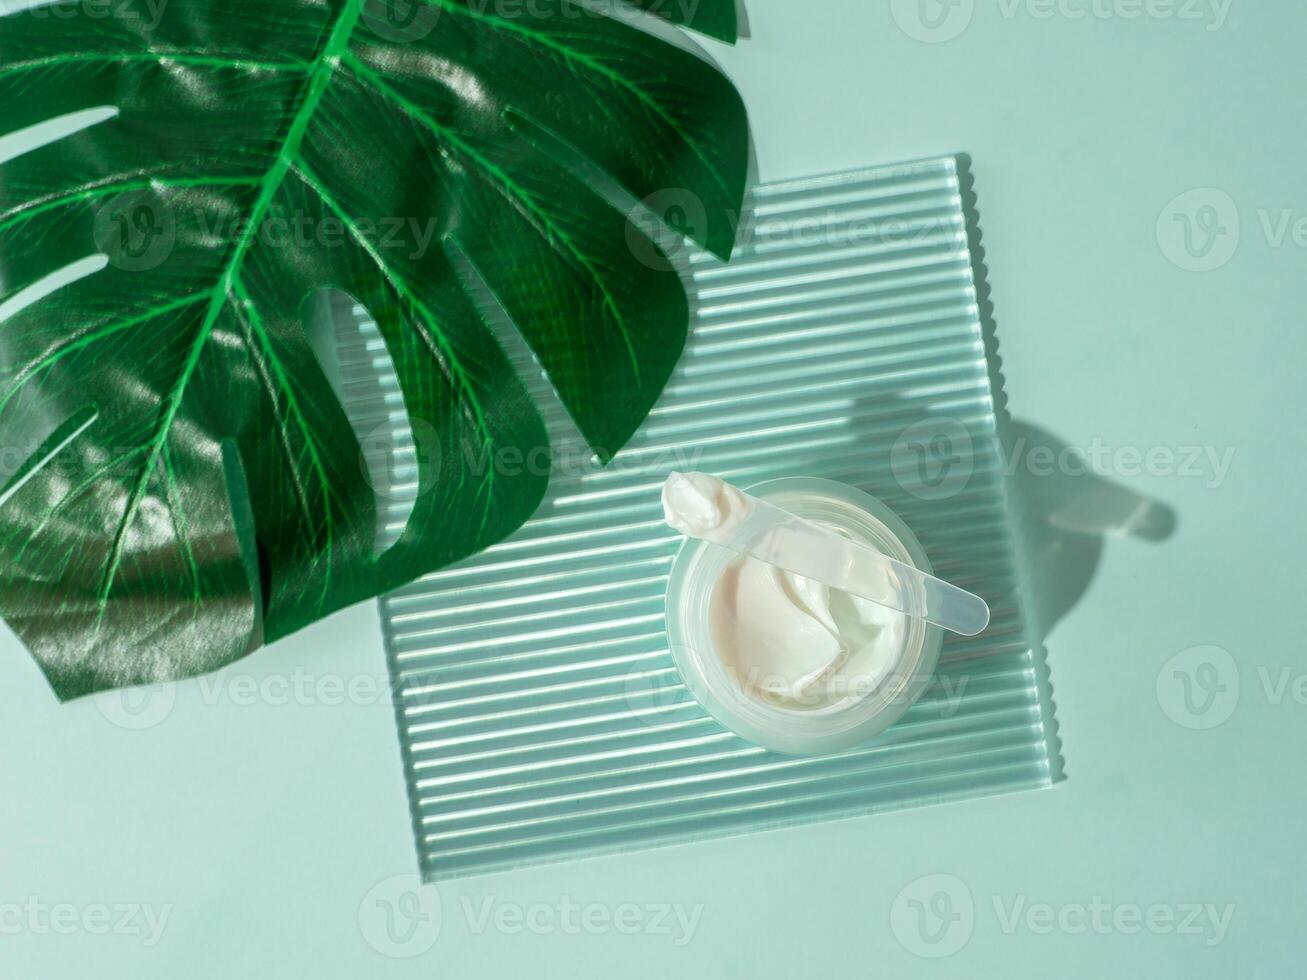 Cosmetic cream or moustirizer on transparent ribbed acrylic plate, tropical palm monstera leaf over blue background. Open round jar, aesthetic swirls cream and spatula. Top view flatlay. Copy space photo